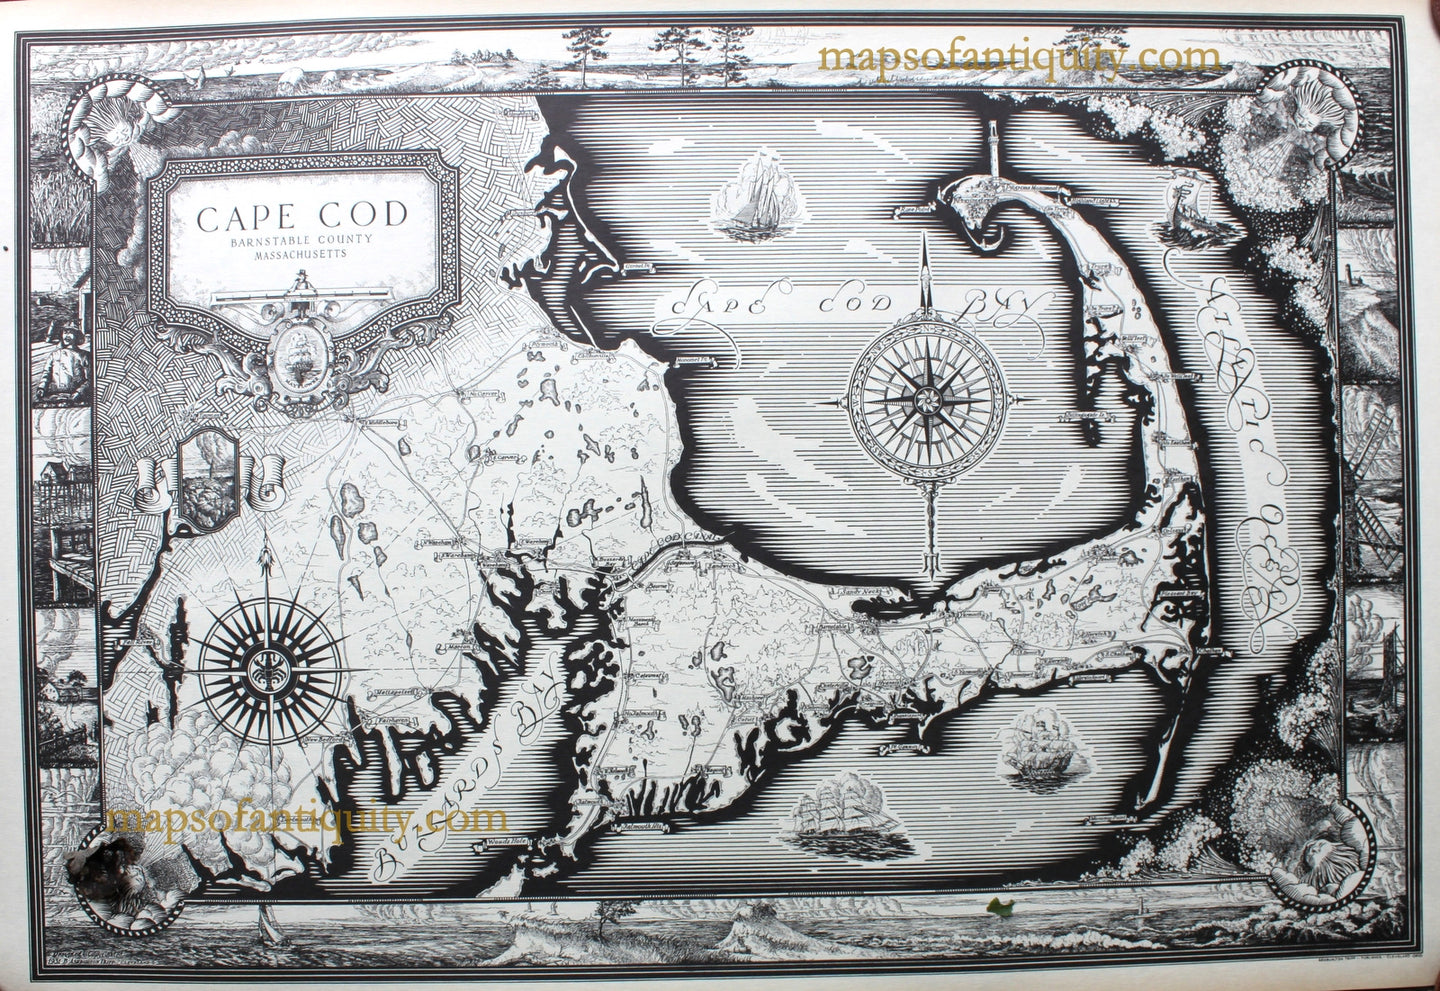 Reproduction-Antique-Map-Cape-Cod-Barnstable-County-Massachusetts-1931-Ashburton-Tripp-Reproduction-Reproduction-Cape-Cod-and-Islands-Reproduction--Maps-Of-Antiquity